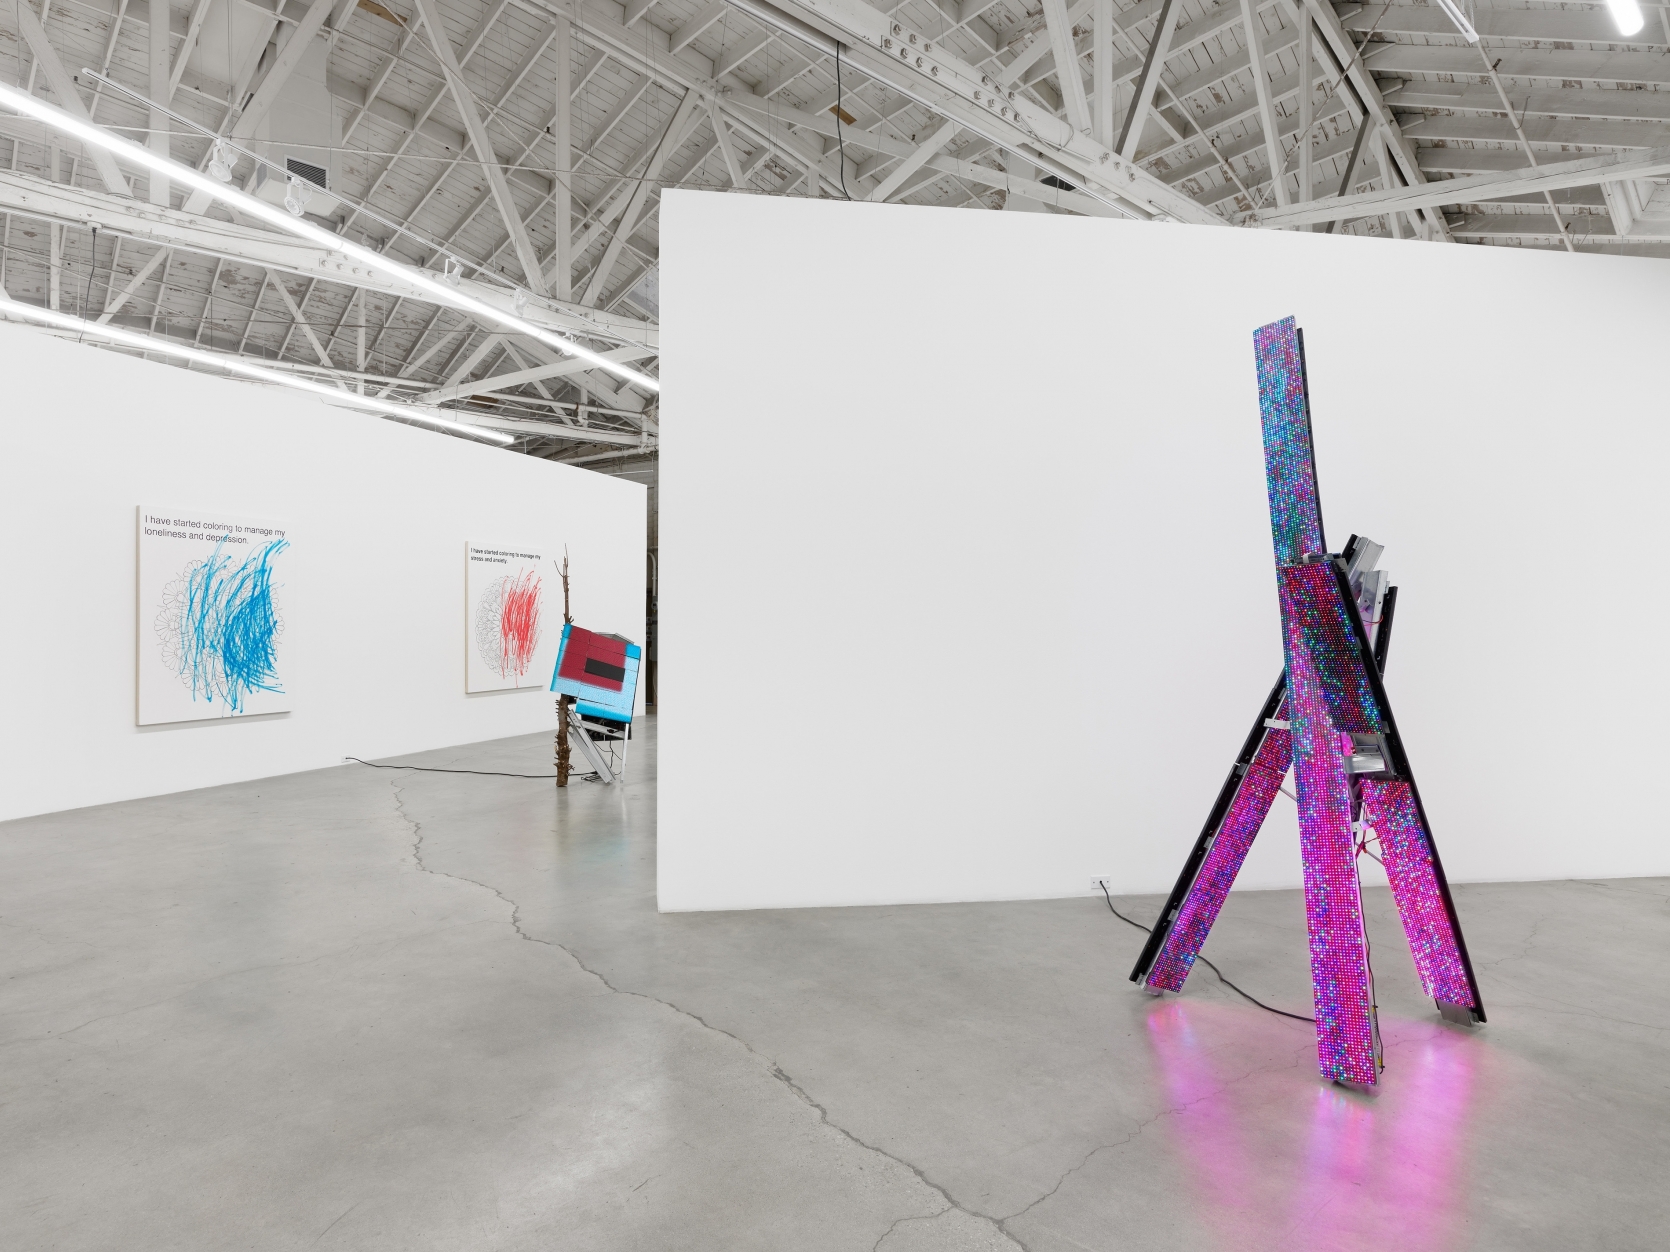  Screen Time, installation view, 2021